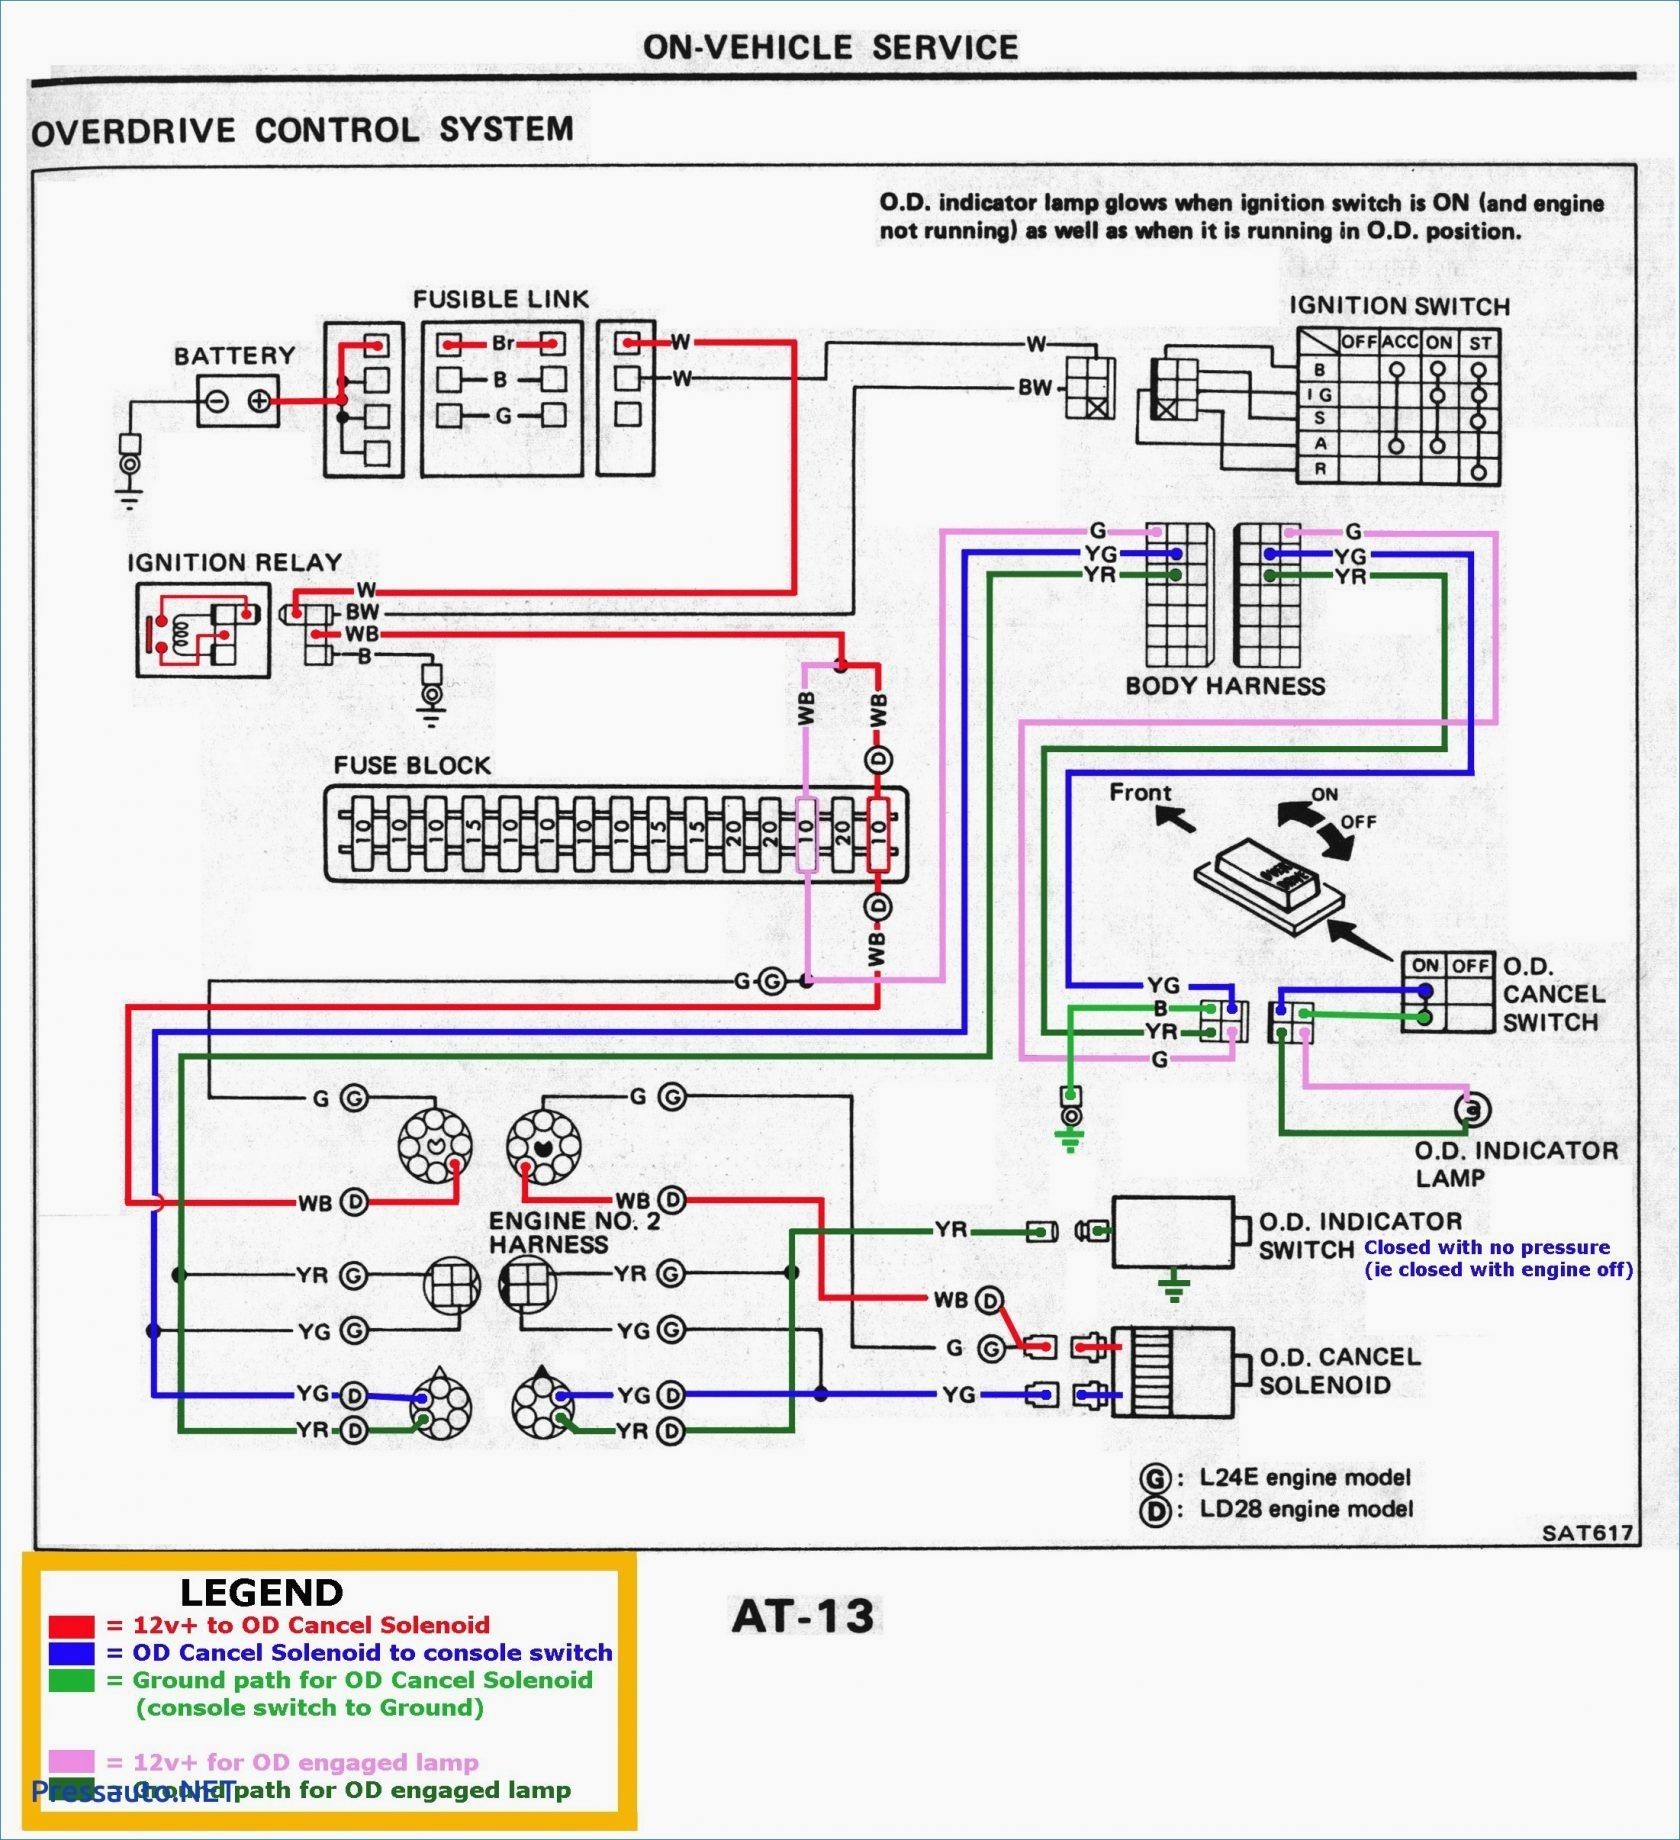 1992 toyota Camry Parts Diagram 1992 toyota Wiring Diagram Wiring Diagram toolbox Of 1992 toyota Camry Parts Diagram